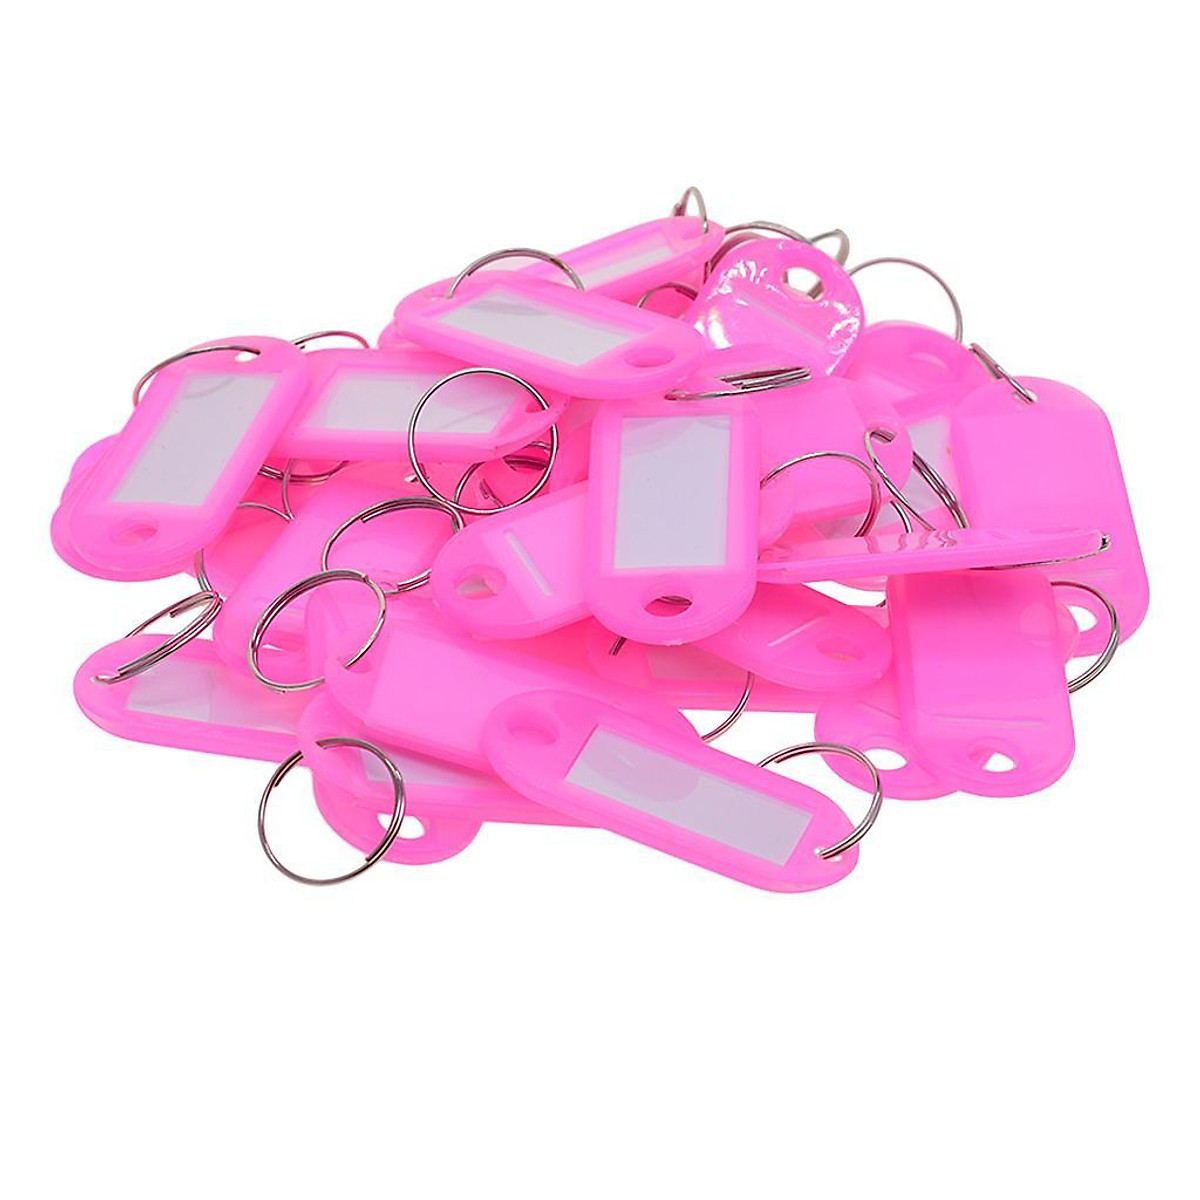 100Pcs Labeling Tags Blank Gift Tags with String Attached Marking